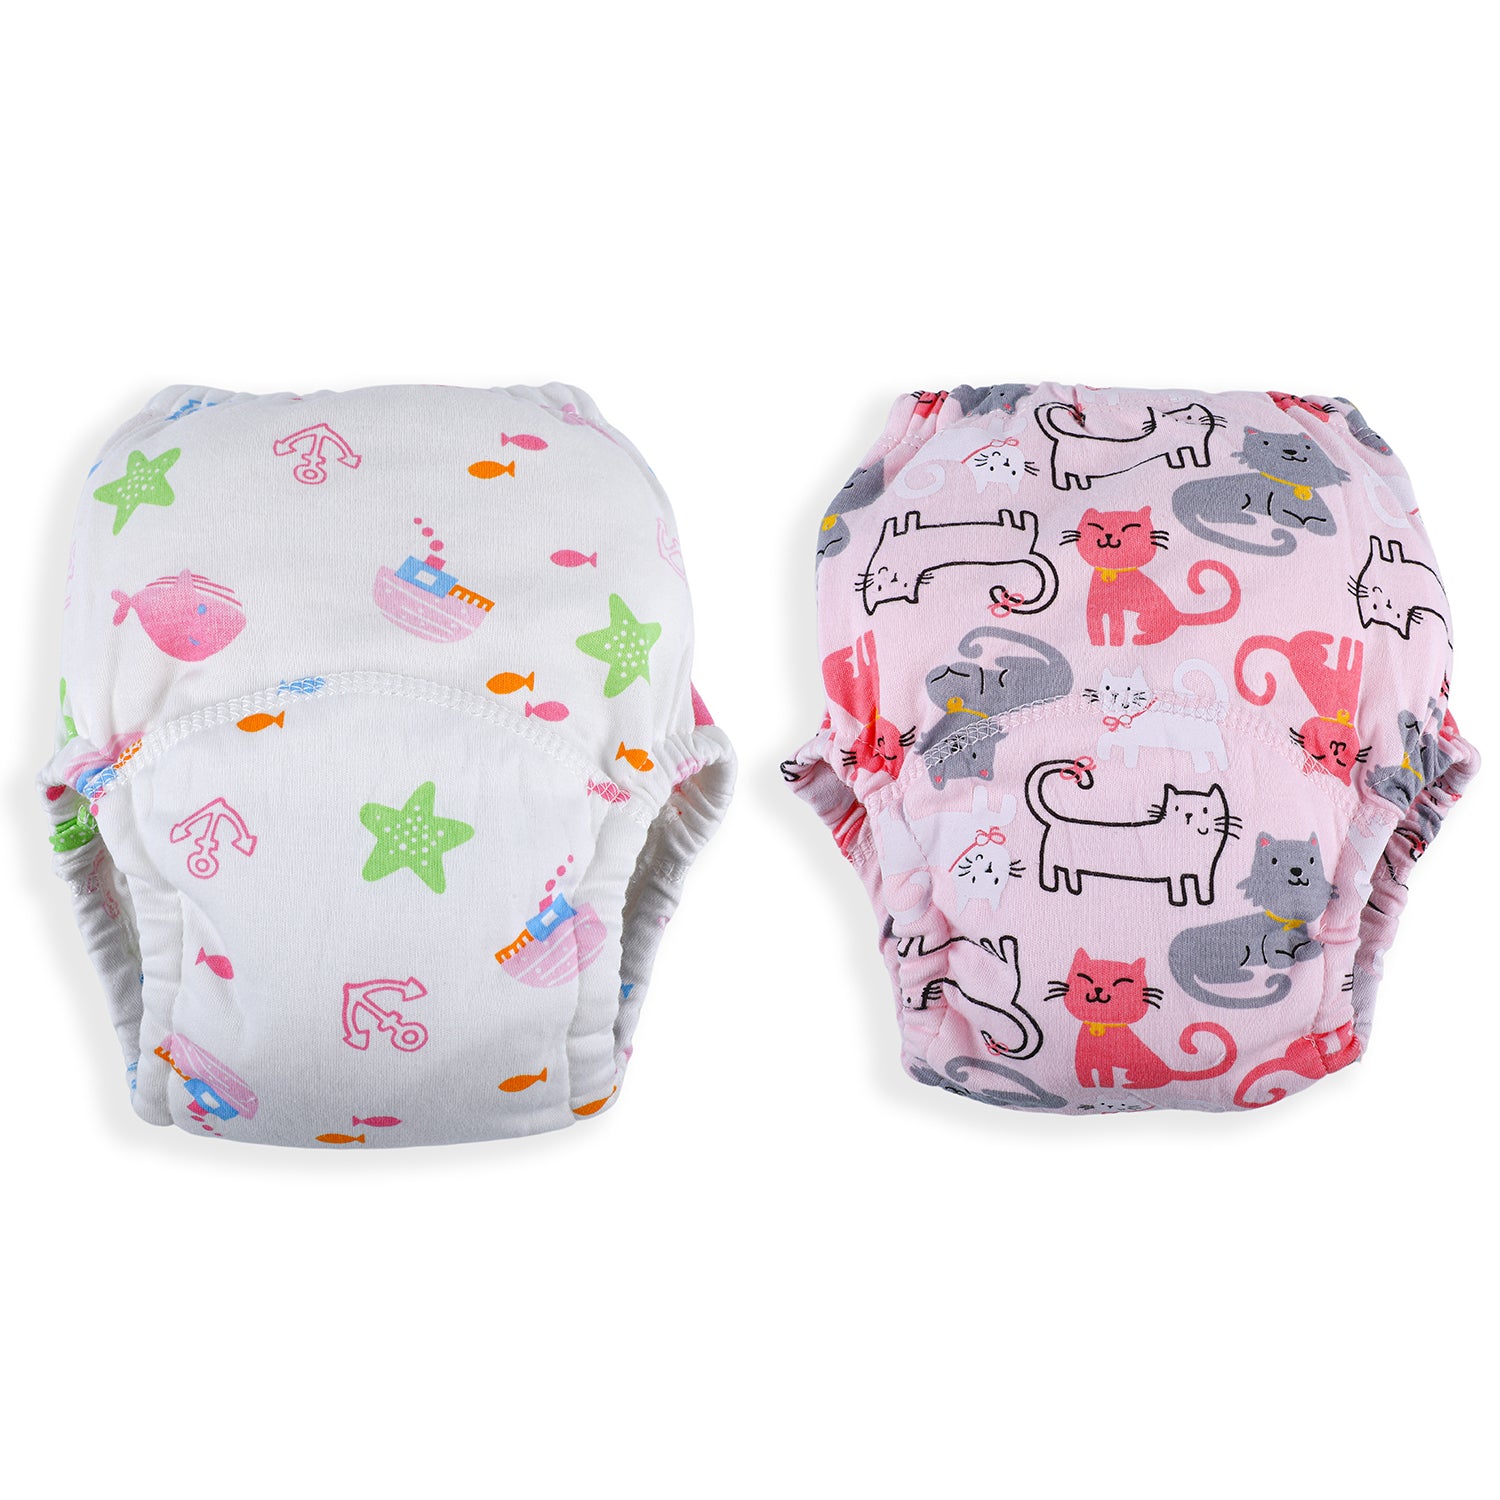 Buy Diapering VParents Solid Washable Baby Cloth Diaper Reusable Adjustable  Size Waterproof Pocket Cloth Diaper Nappie (With Insert) (Pack of 2)  Diapering for Unisex Jollee